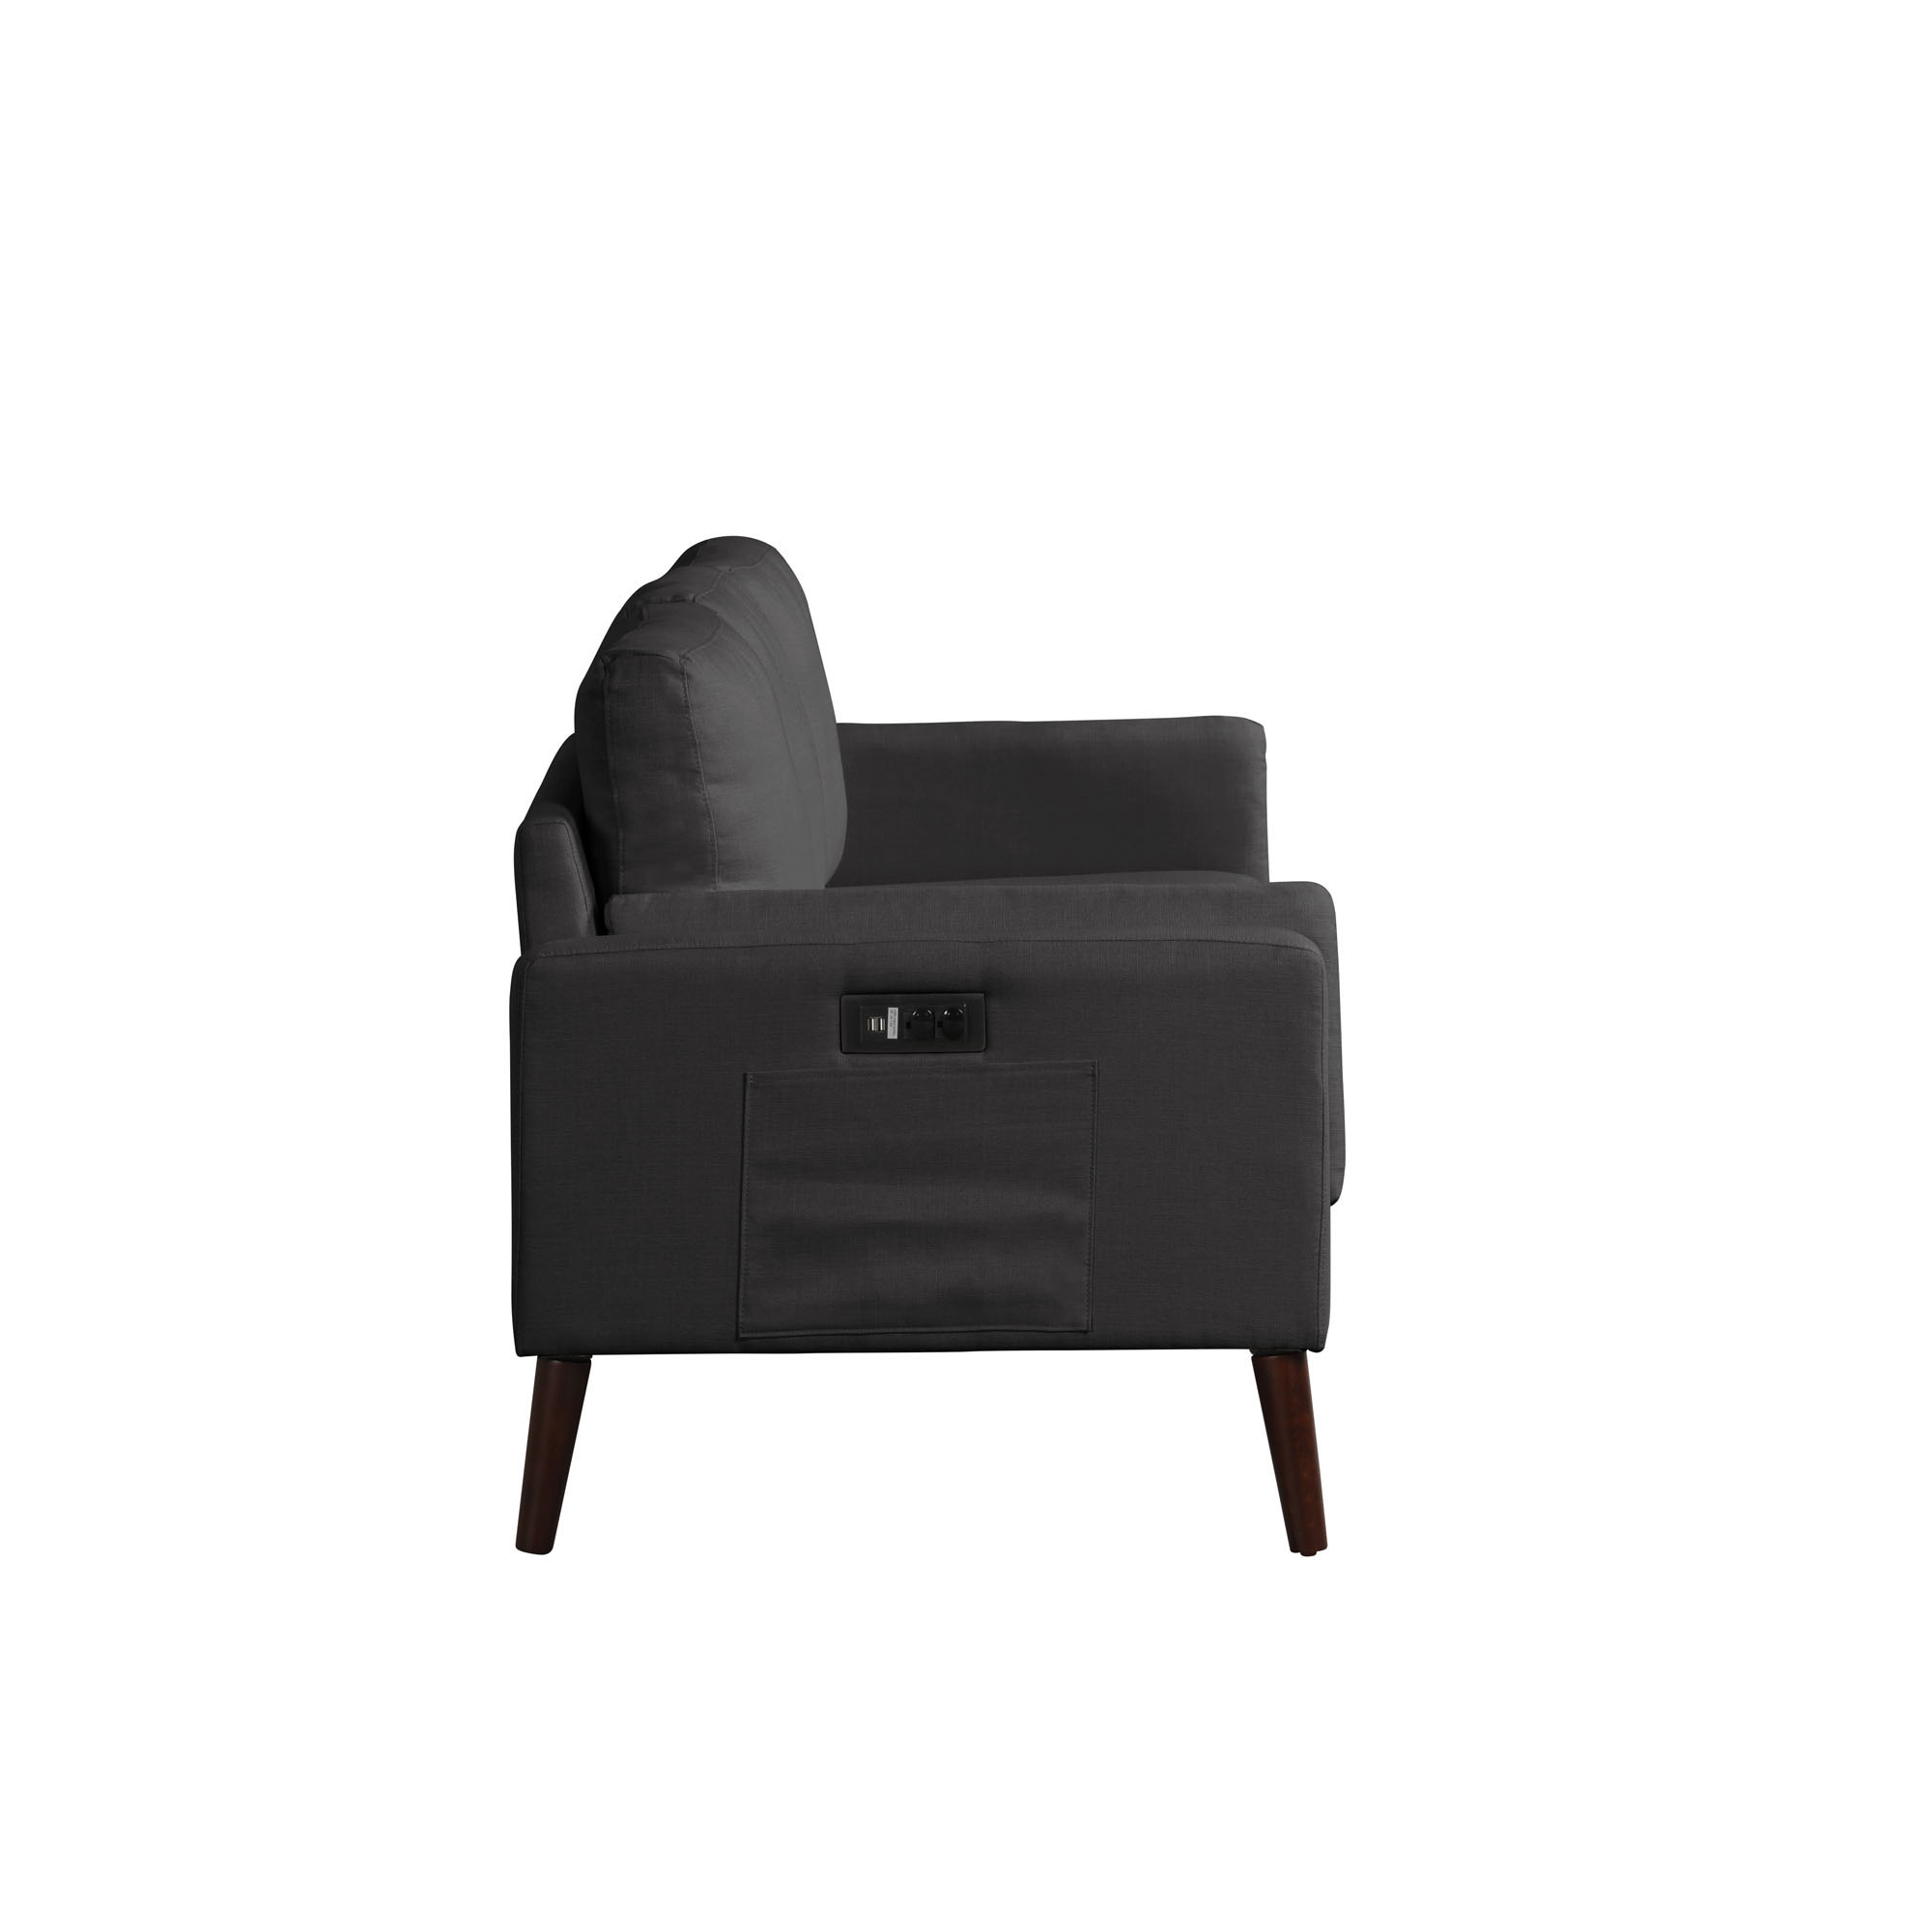 Elm & Oak Nathaniel Modern Sofa with Side Pocket and USB Power, Black Fabric Upholstery - image 5 of 10